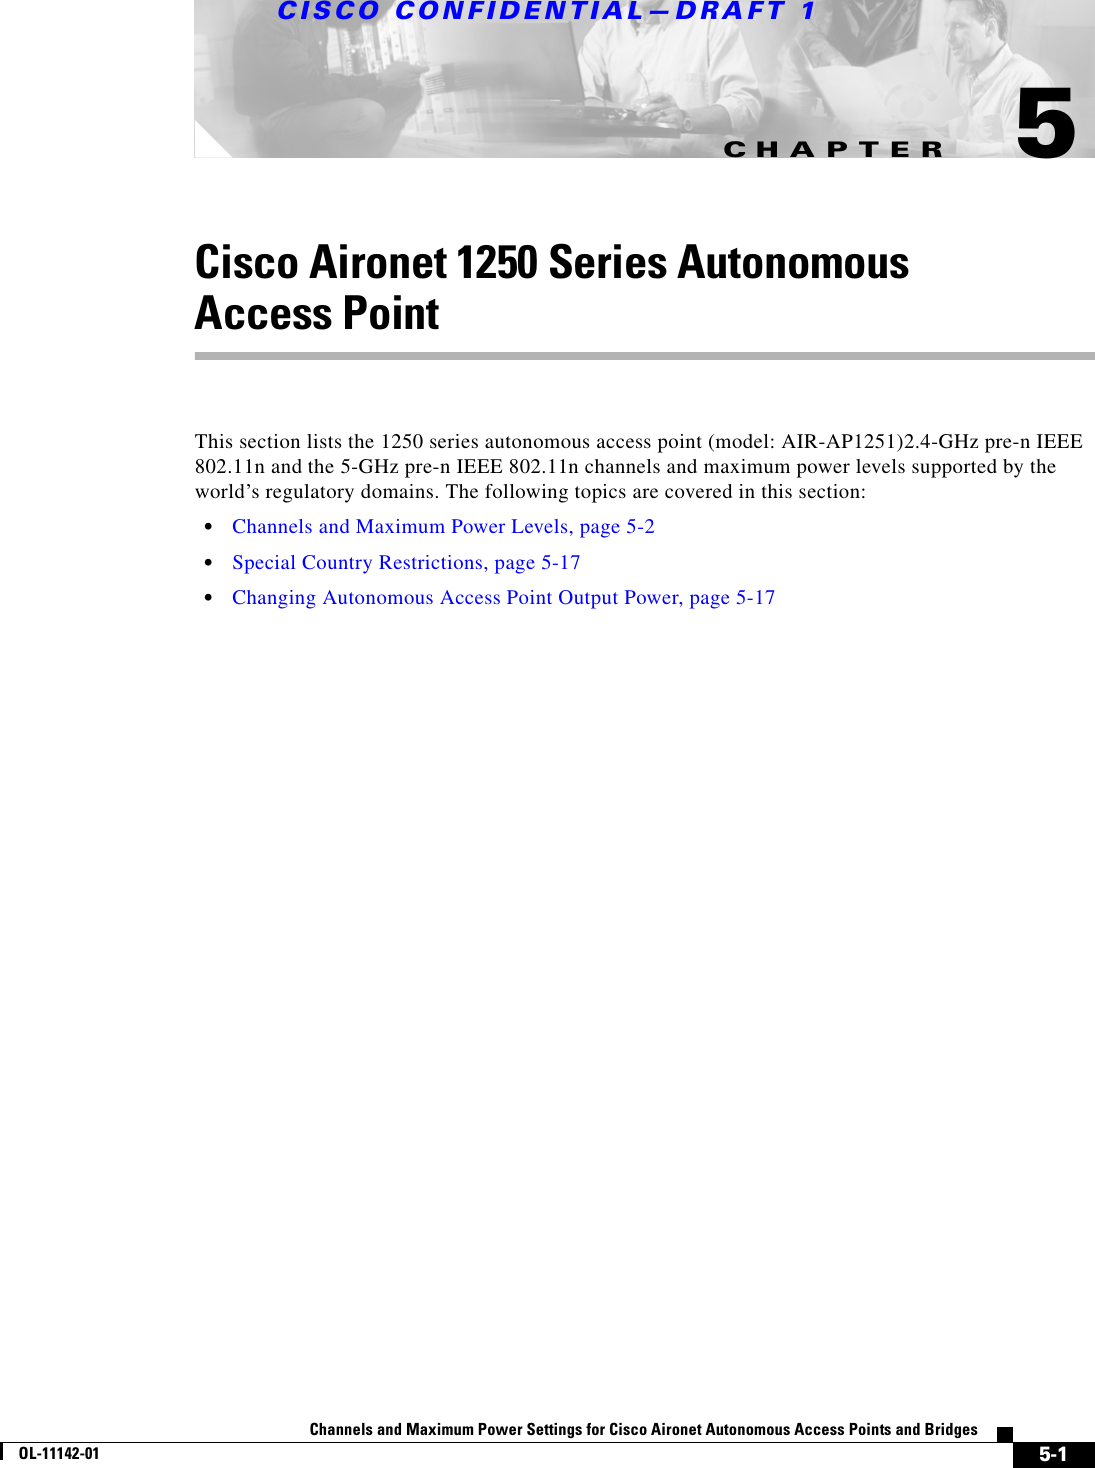 CHAPTERCISCO CONFIDENTIAL—DRAFT 15-1Channels and Maximum Power Settings for Cisco Aironet Autonomous Access Points and BridgesOL-11142-015Cisco Aironet 1250 Series Autonomous Access Point This section lists the 1250 series autonomous access point (model: AIR-AP1251)2.4-GHz pre-n IEEE 802.11n and the 5-GHz pre-n IEEE 802.11n channels and maximum power levels supported by the world’s regulatory domains. The following topics are covered in this section:•Channels and Maximum Power Levels, page 5-2•Special Country Restrictions, page 5-17•Changing Autonomous Access Point Output Power, page 5-17